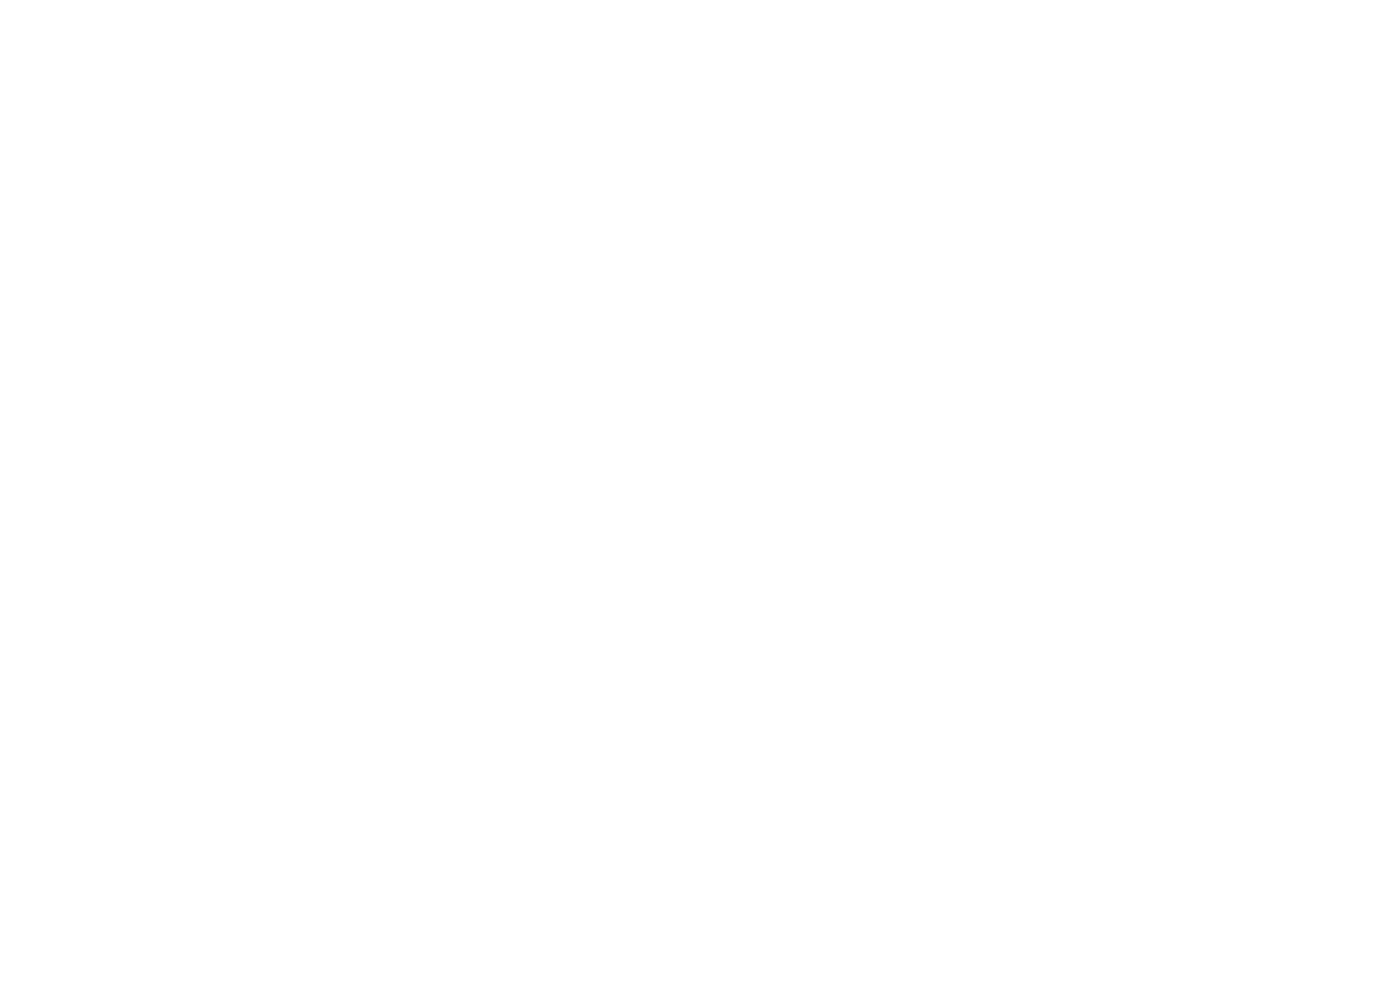 RoofCrafters Logo